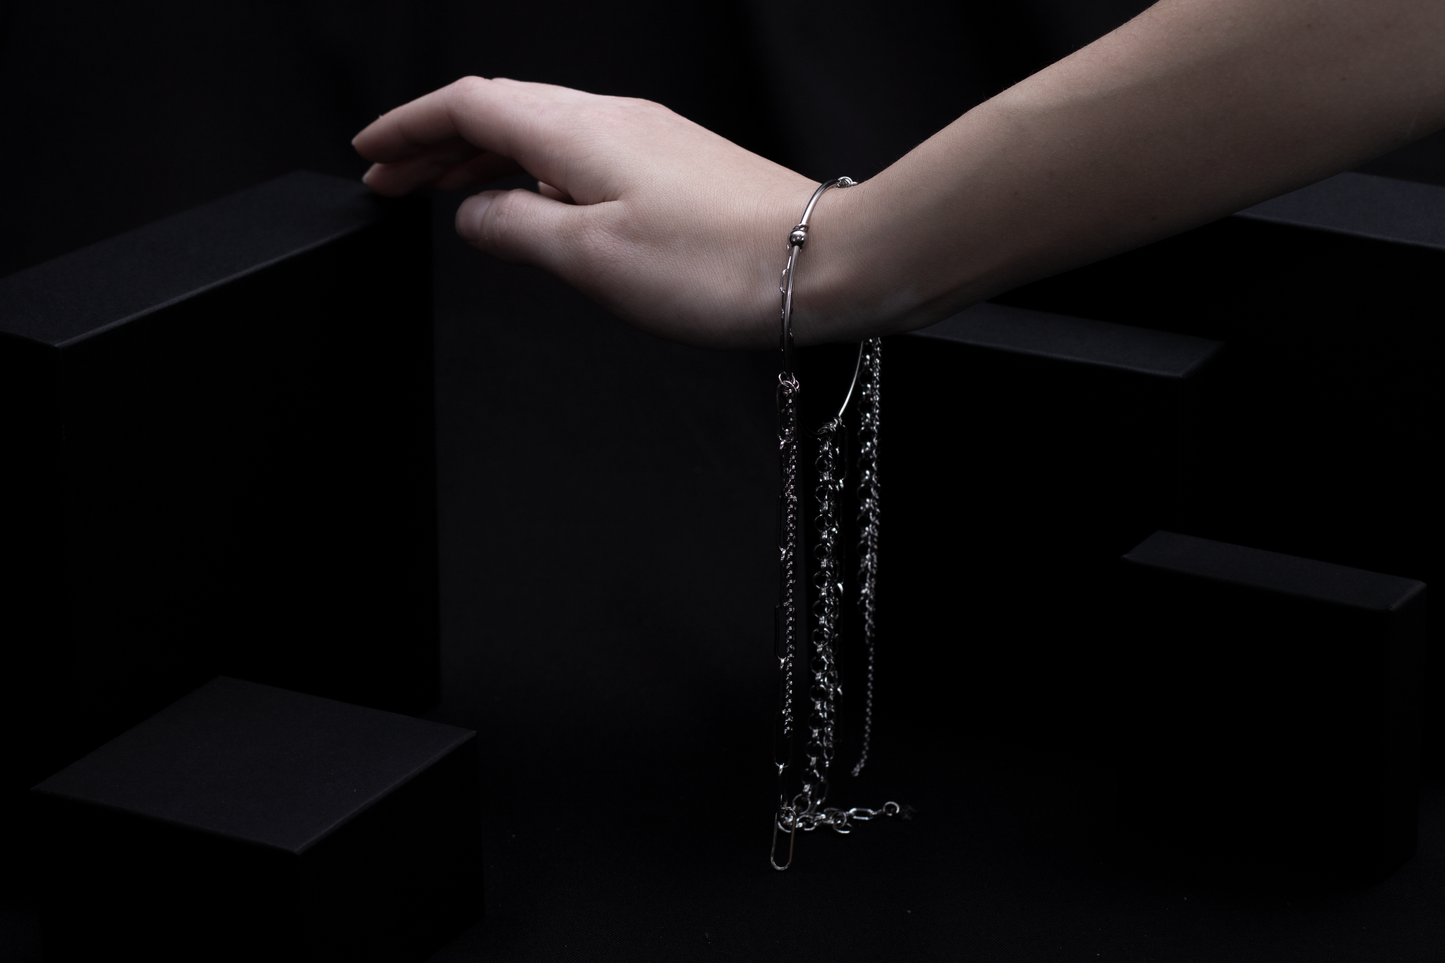 A wrist adorned with a Myril Jewels rigid bracelet is elegantly positioned against a dark background, with multiple chains draping gracefully from it. The bracelet’s design exudes gothic allure, making it an impeccable choice for those embracing dark-avantgarde fashion, whether it’s for daily sophistication or a special event.